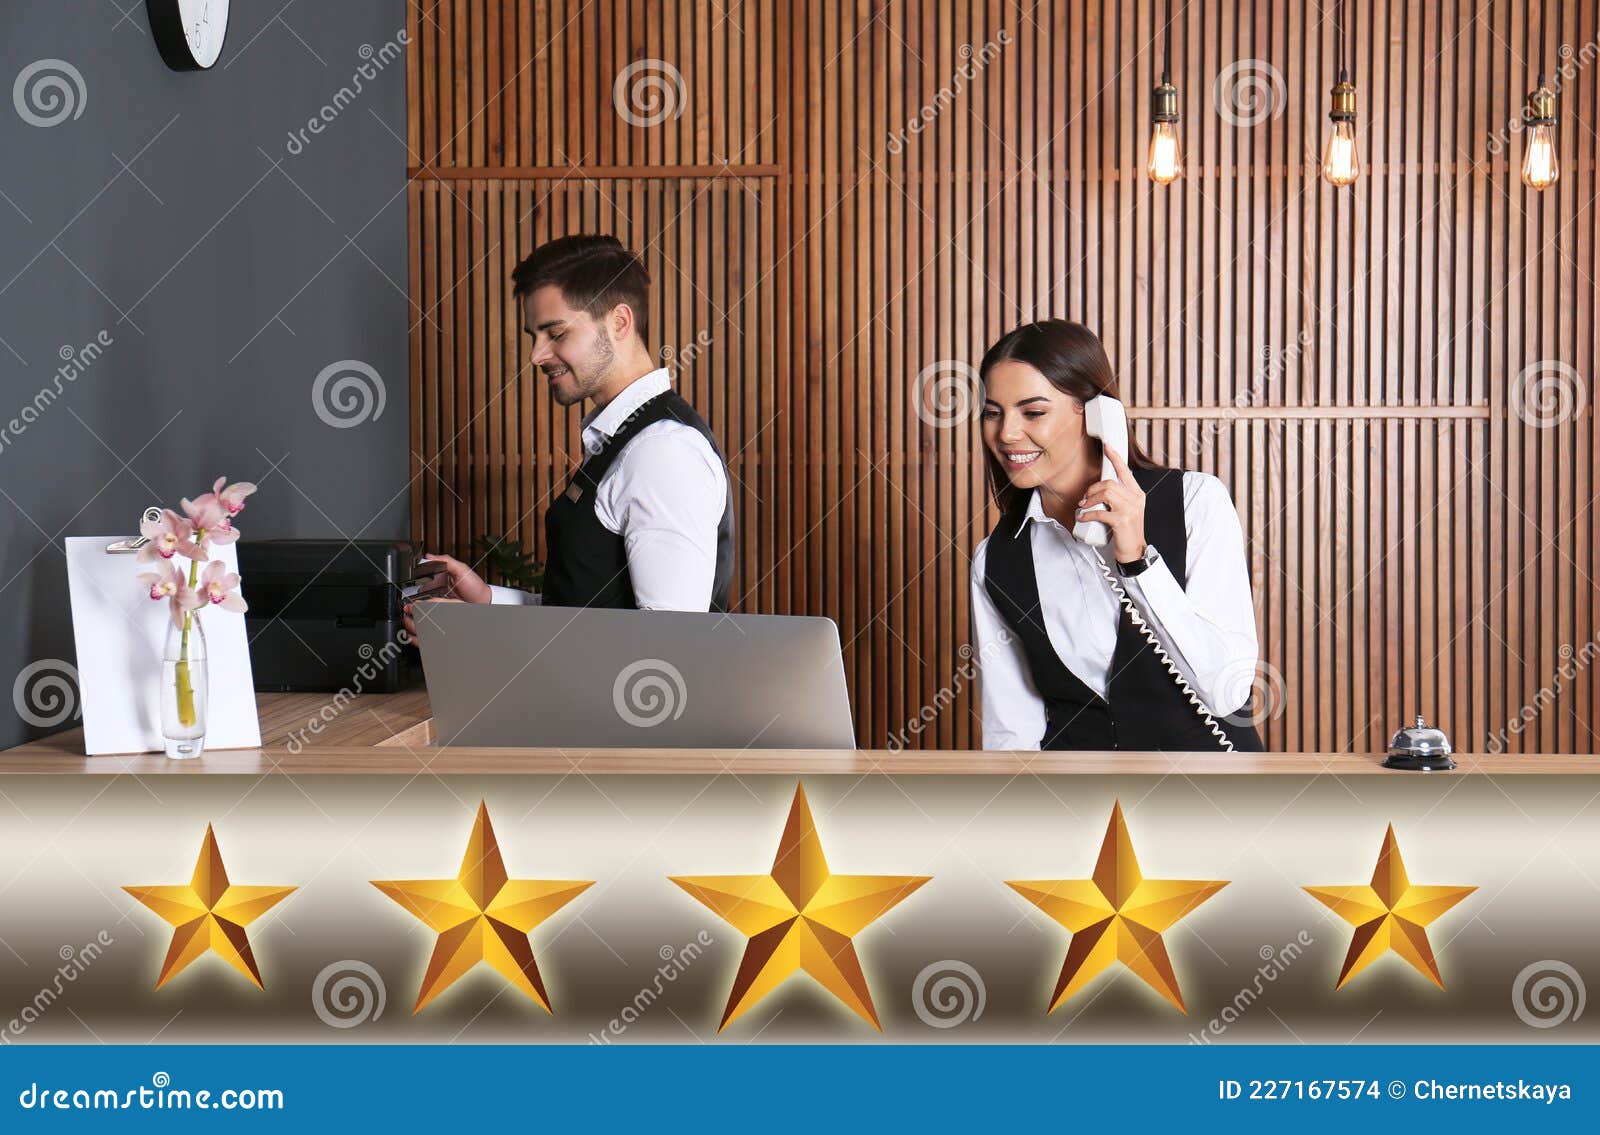 five star luxury hotel. receptionists working at desk